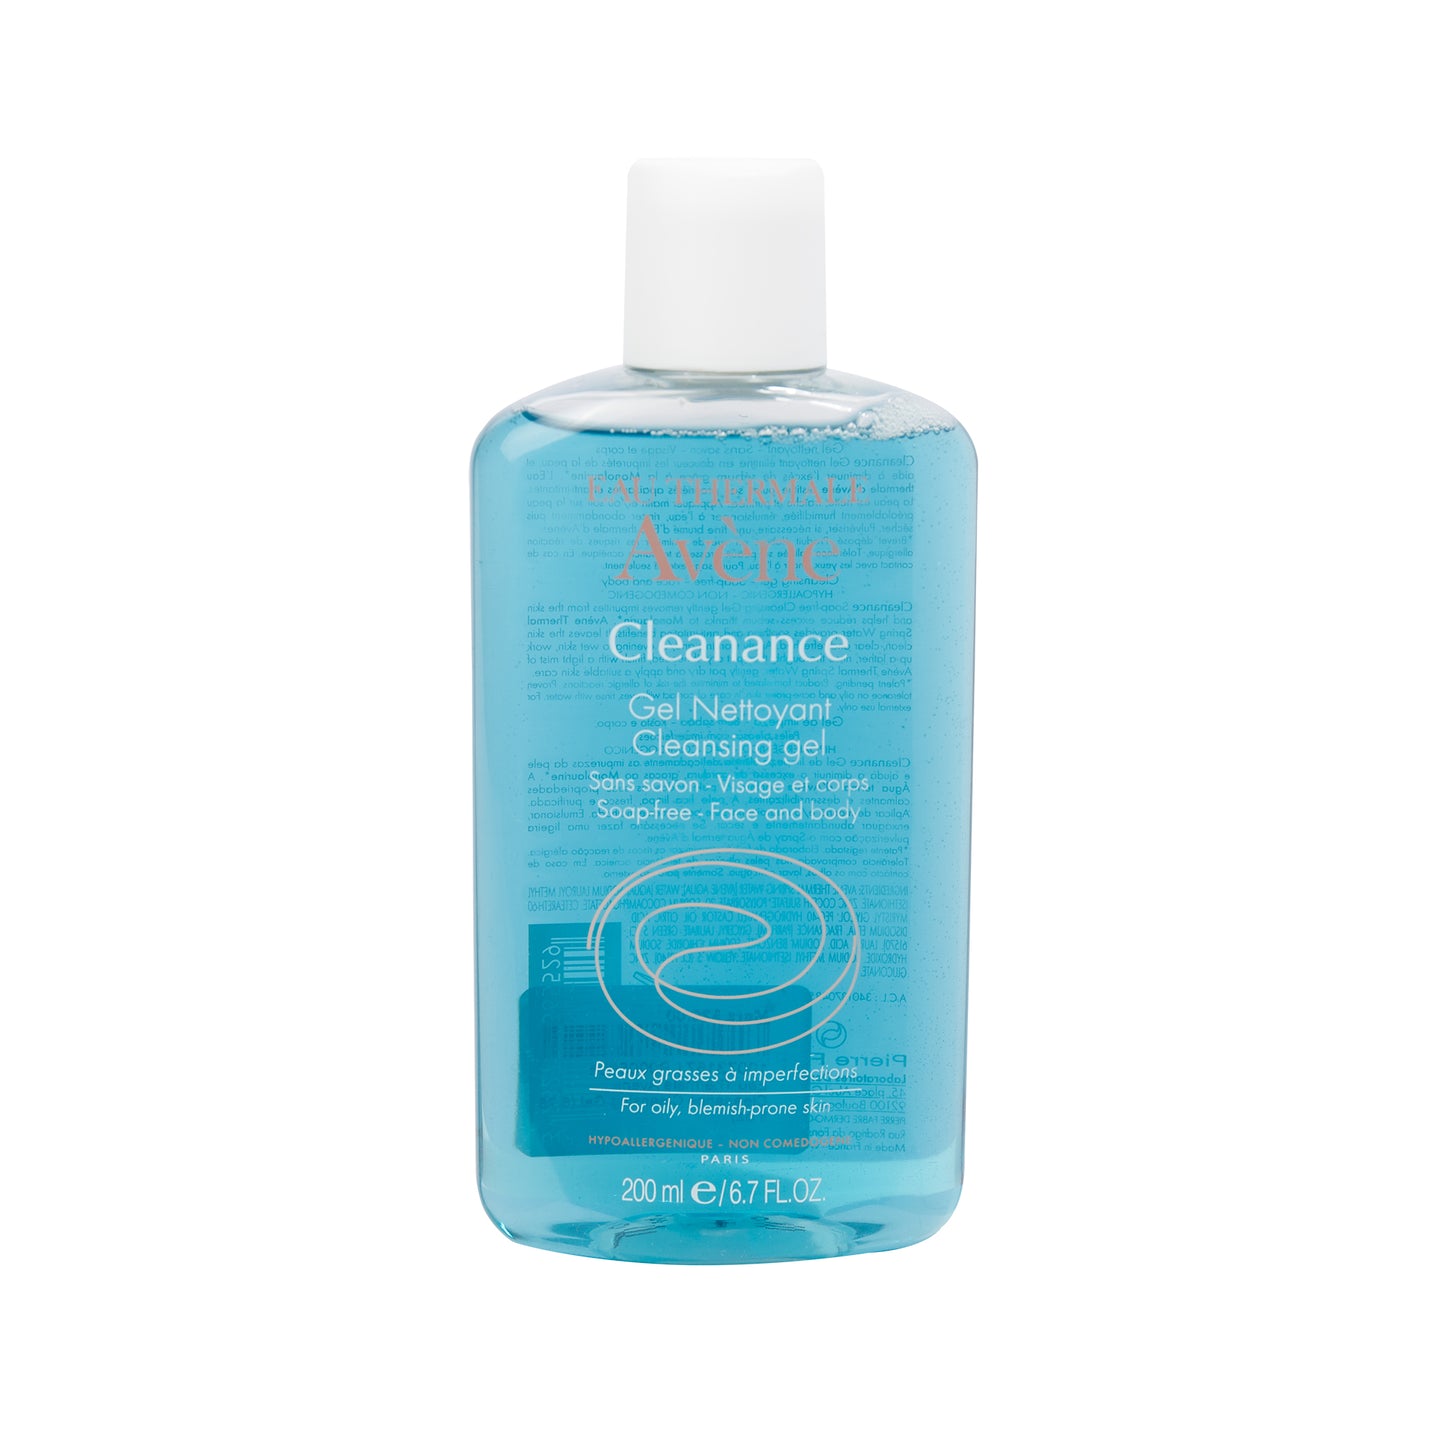 Primary image of Cleanance Cleansing Gel